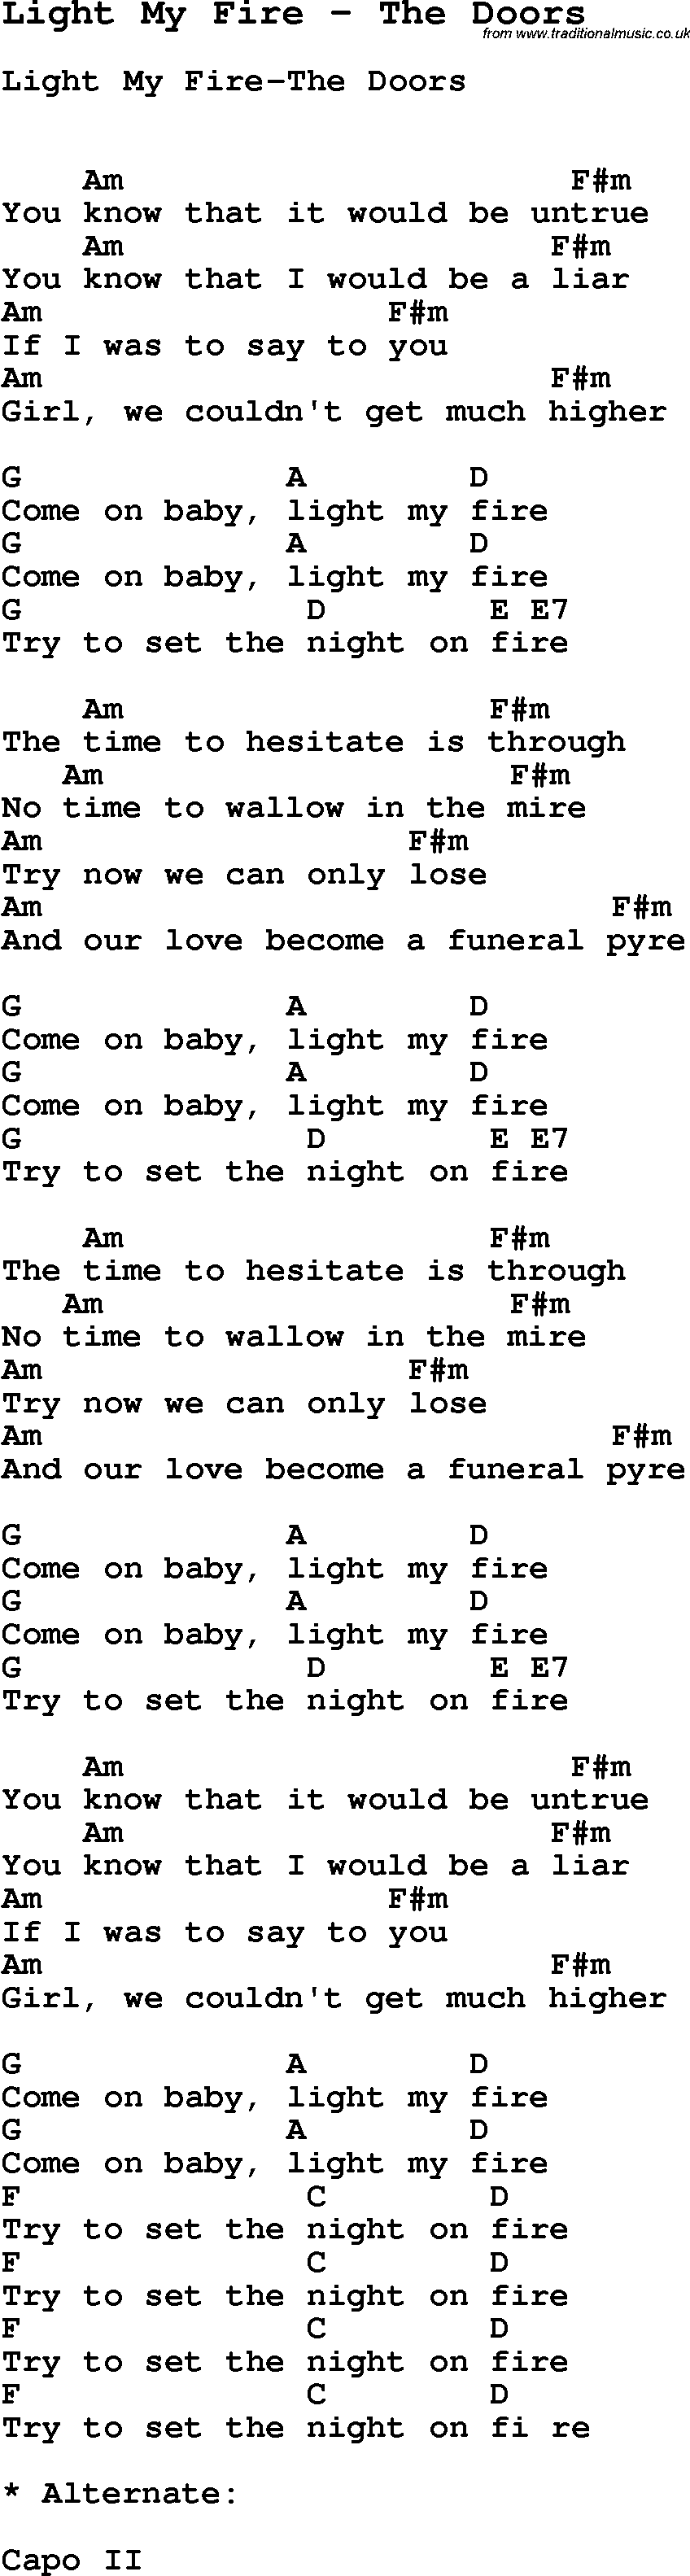 Song Light My Fire by The Doors, with lyrics for vocal performance and accompaniment chords for Ukulele, Guitar Banjo etc.